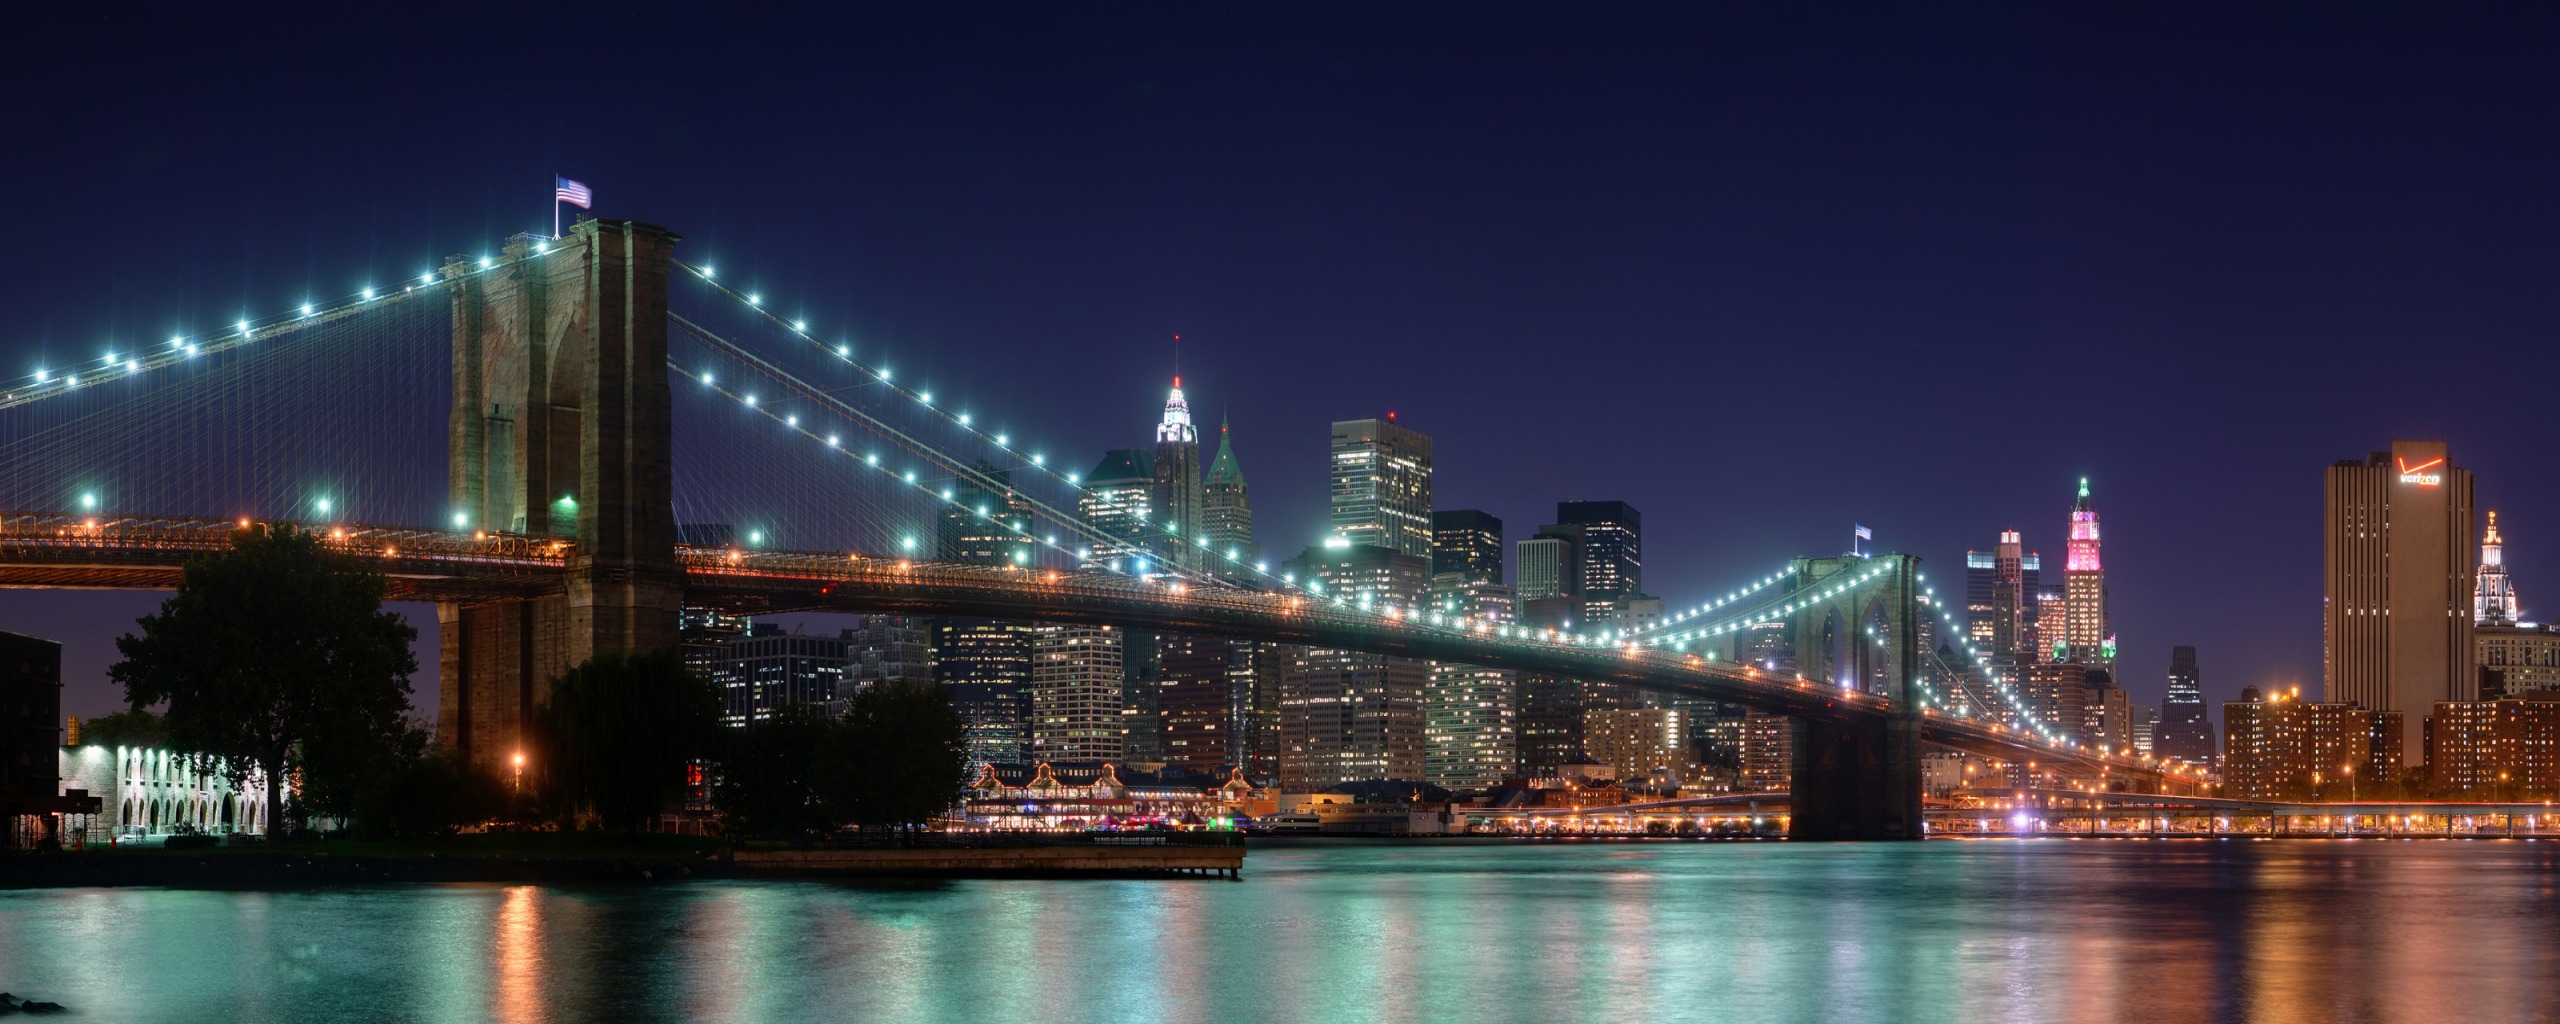 Download wallpaper for 2560x1440 resolution | Brooklyn Bridge Panorama Dual  Monitor | other | Wallpaper Better